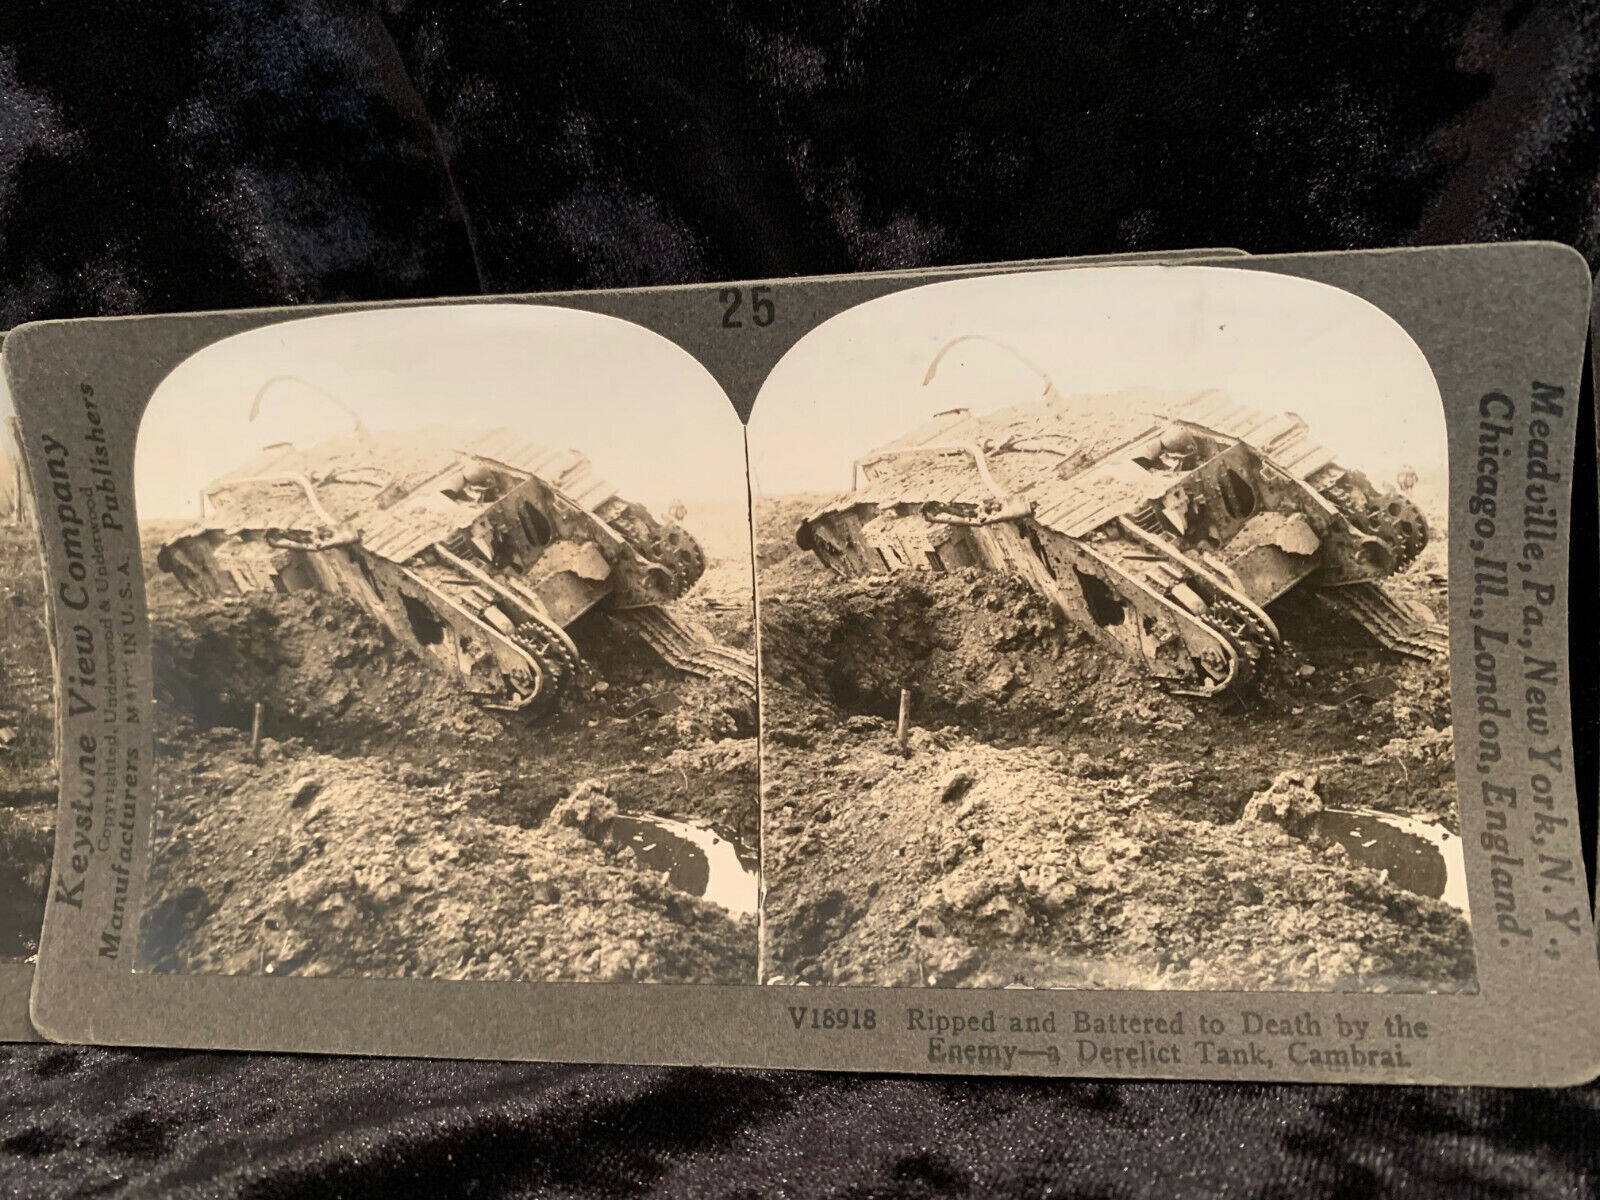 Stereoscope viewer and 79 WWI cards